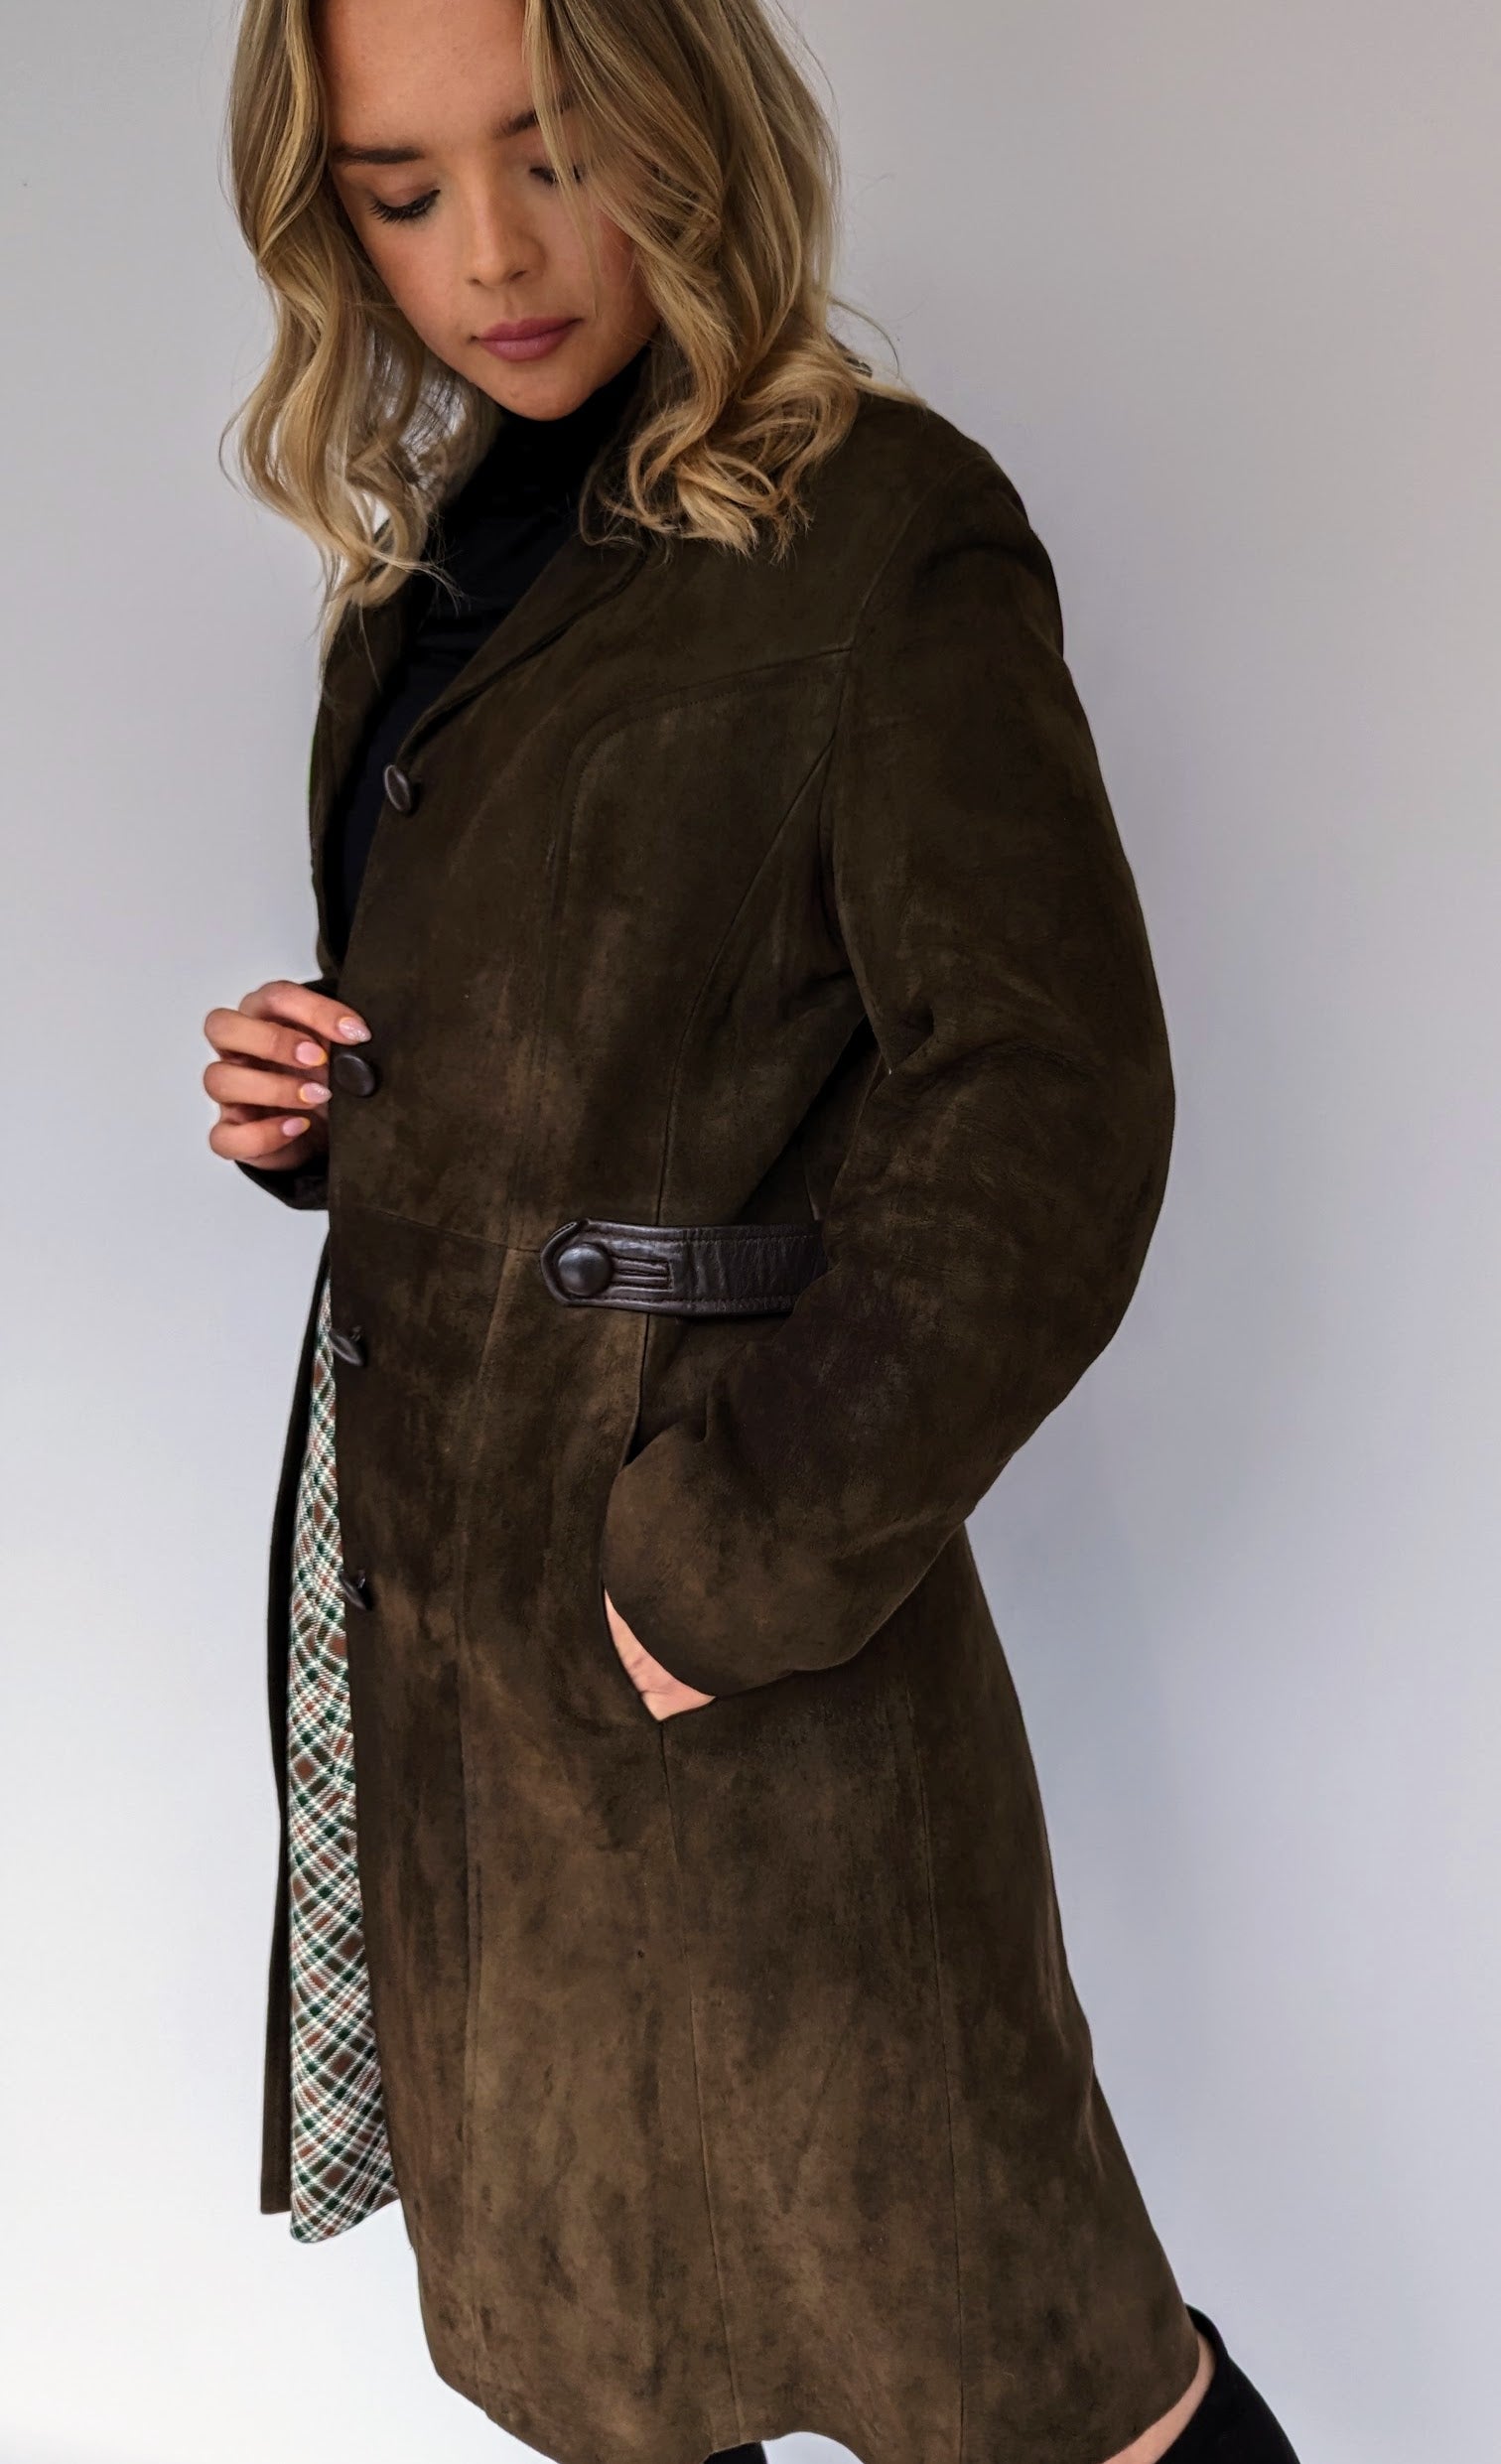 Women's Vintage 60s Long Brown Suede Coat with leather trim and belt